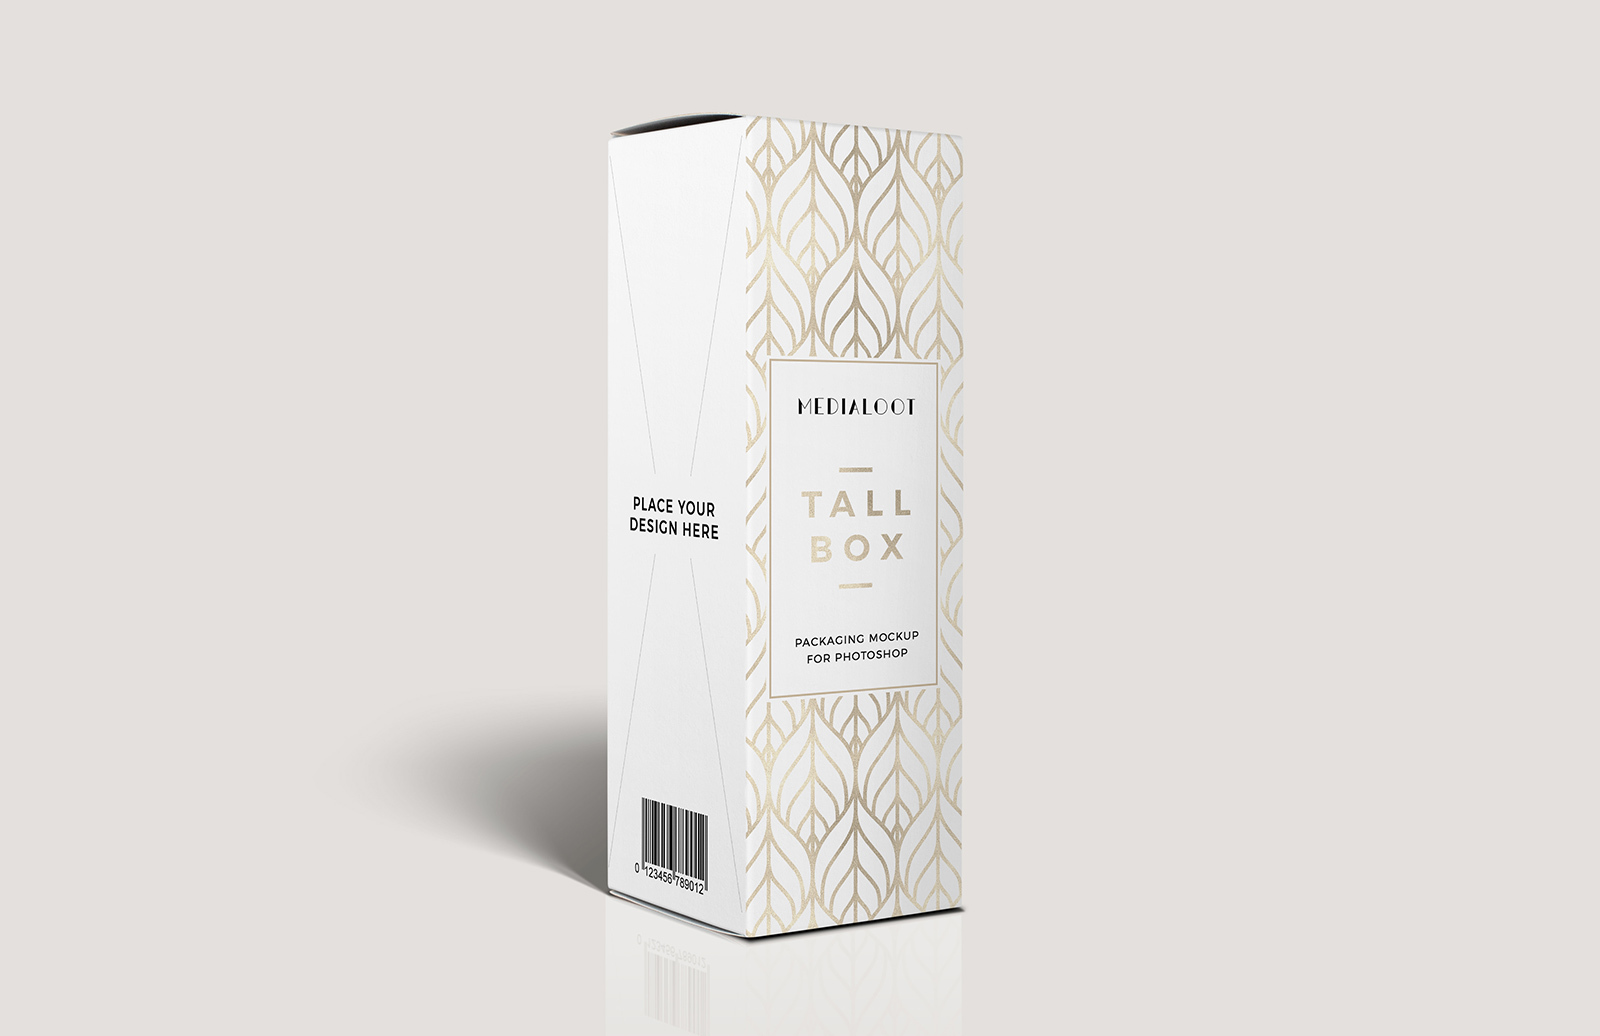 Download Tall Box Packaging Mockup For Photoshop Medialoot PSD Mockup Templates